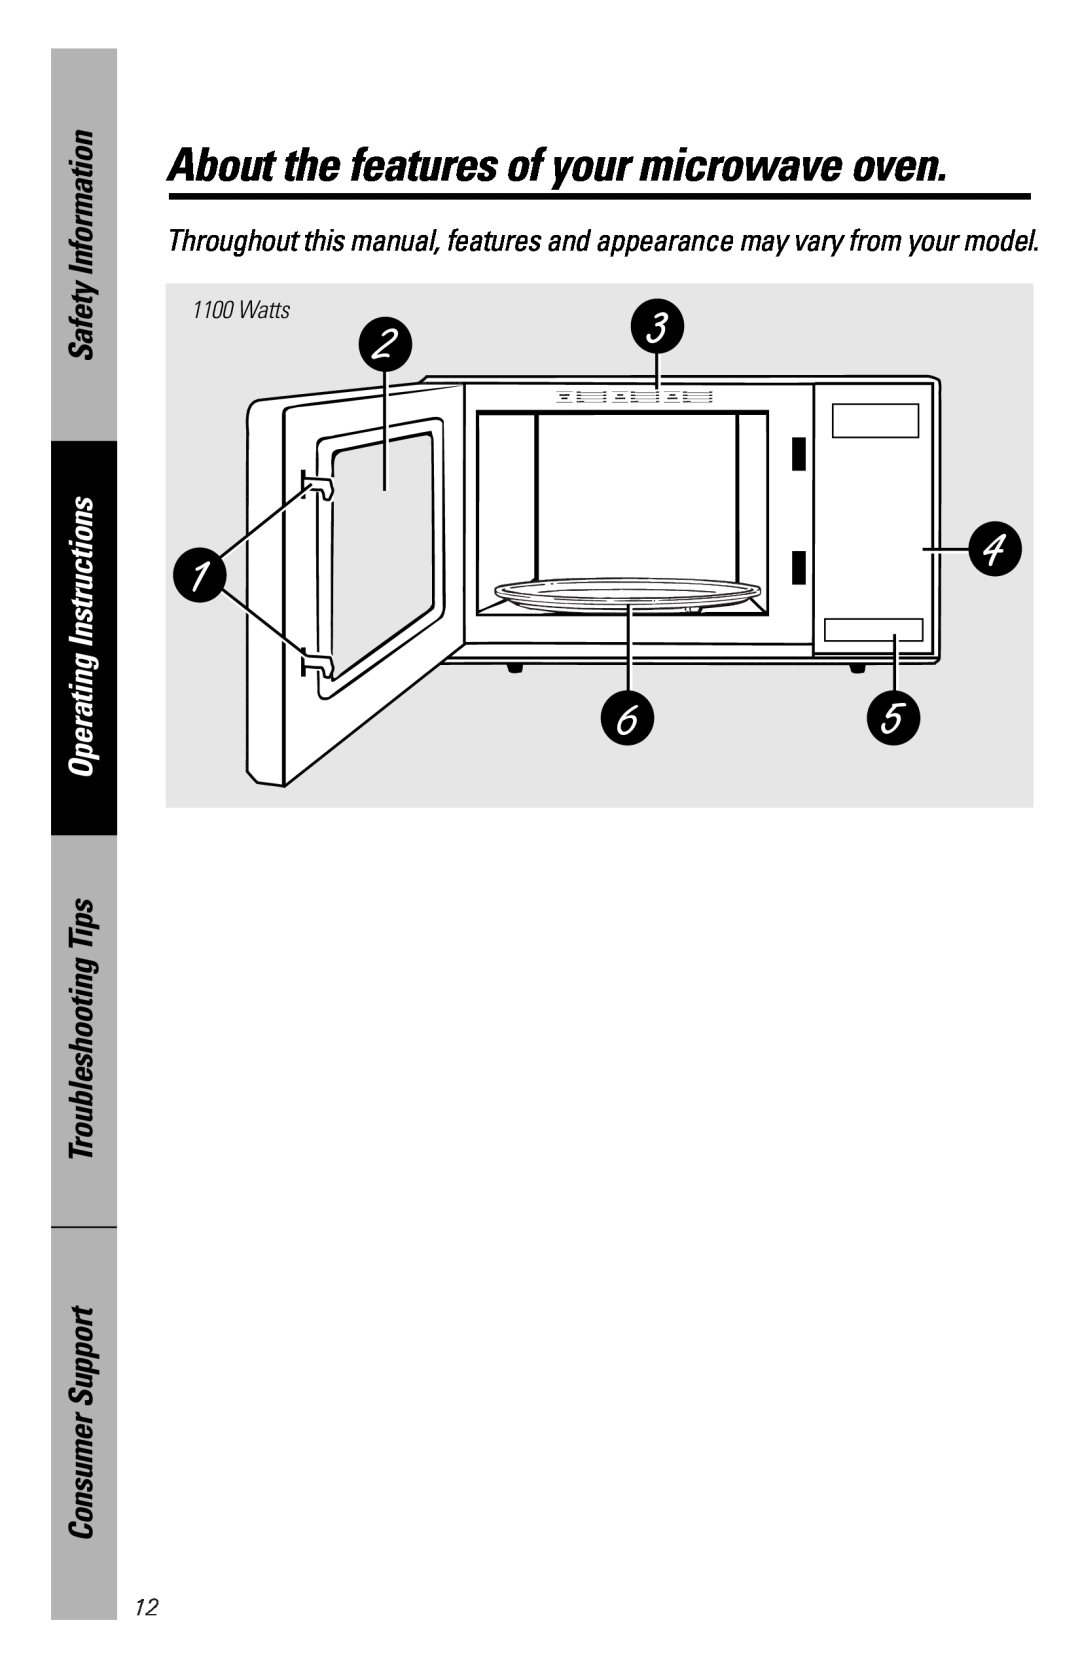 GE JES1334, JES939 owner manual About the features of your microwave oven, Safety Information, Operating Instructions 